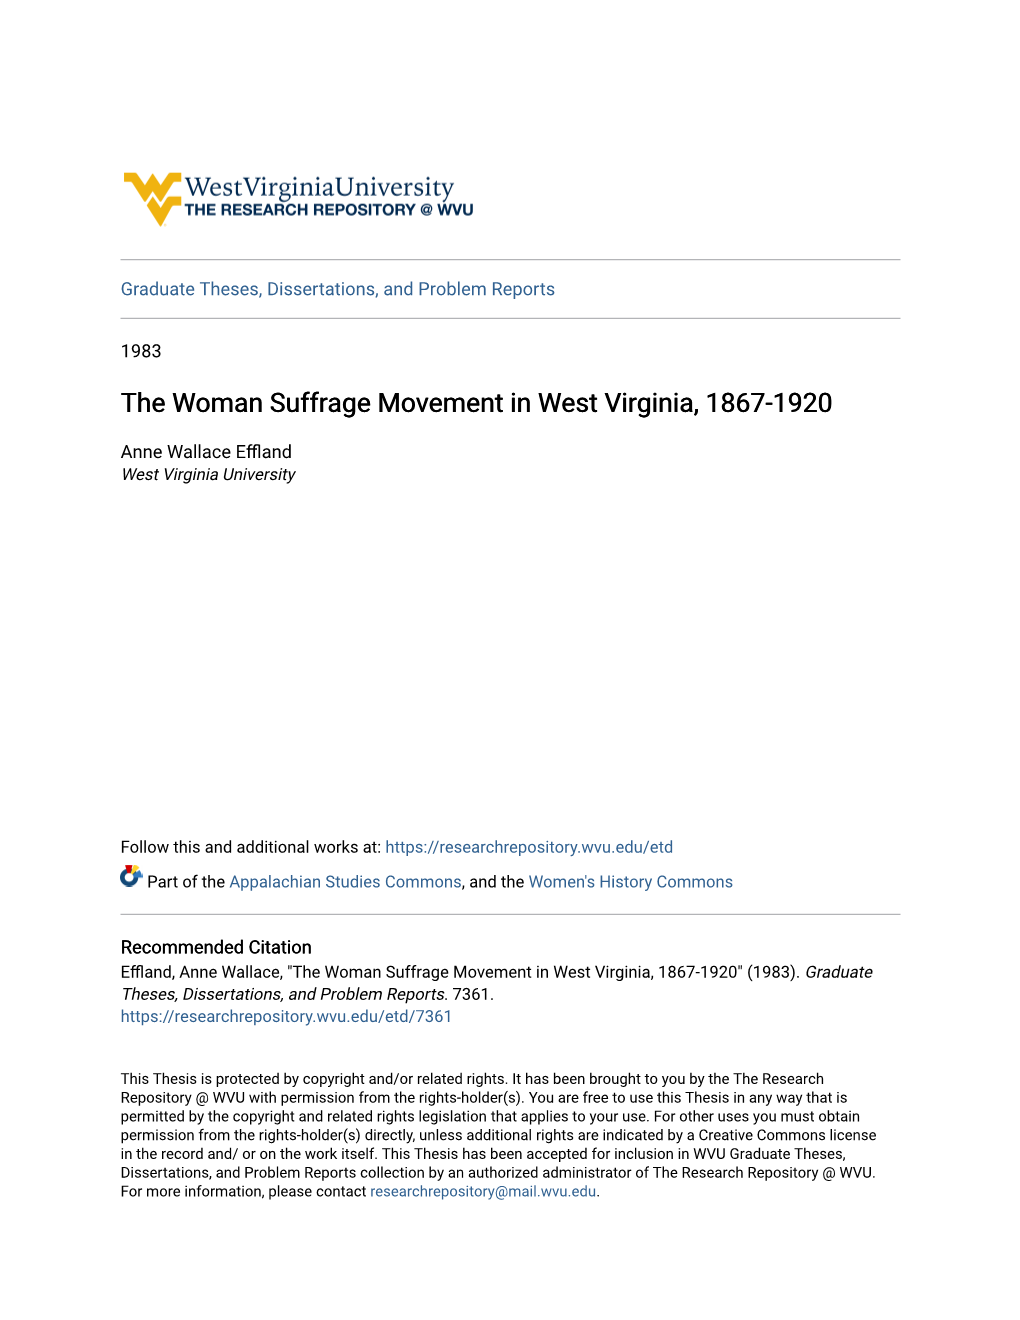 The Woman Suffrage Movement in West Virginia, 1867-1920